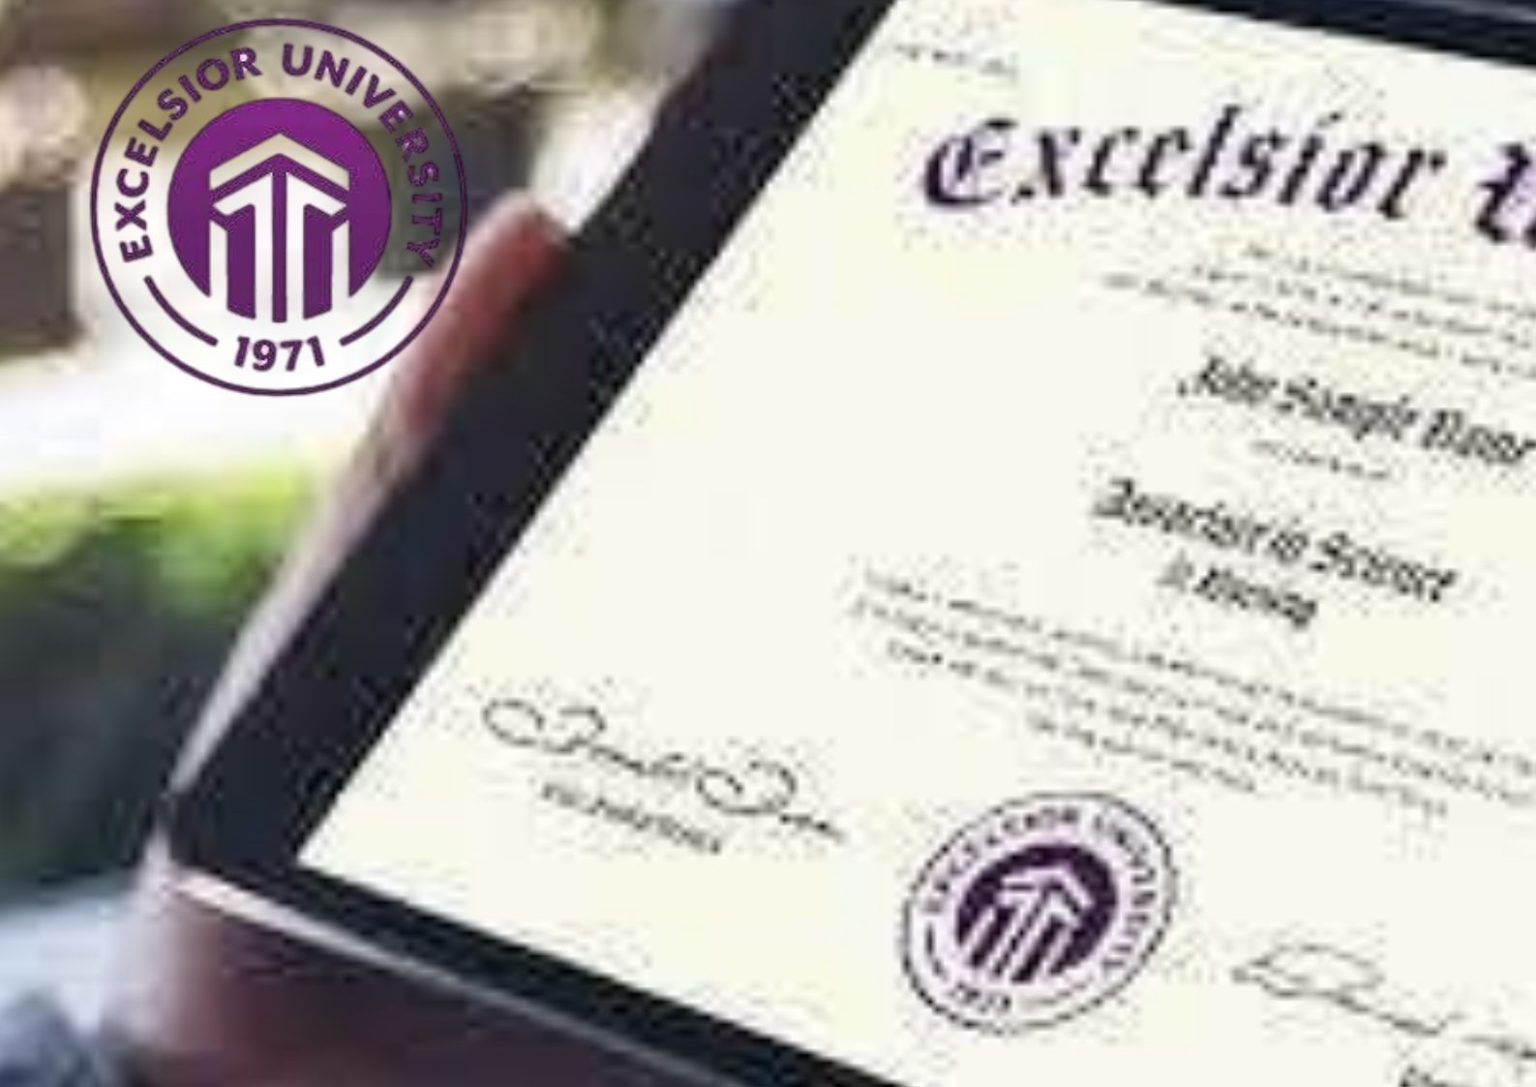 Excelsior University History, Application process, Tuition plan